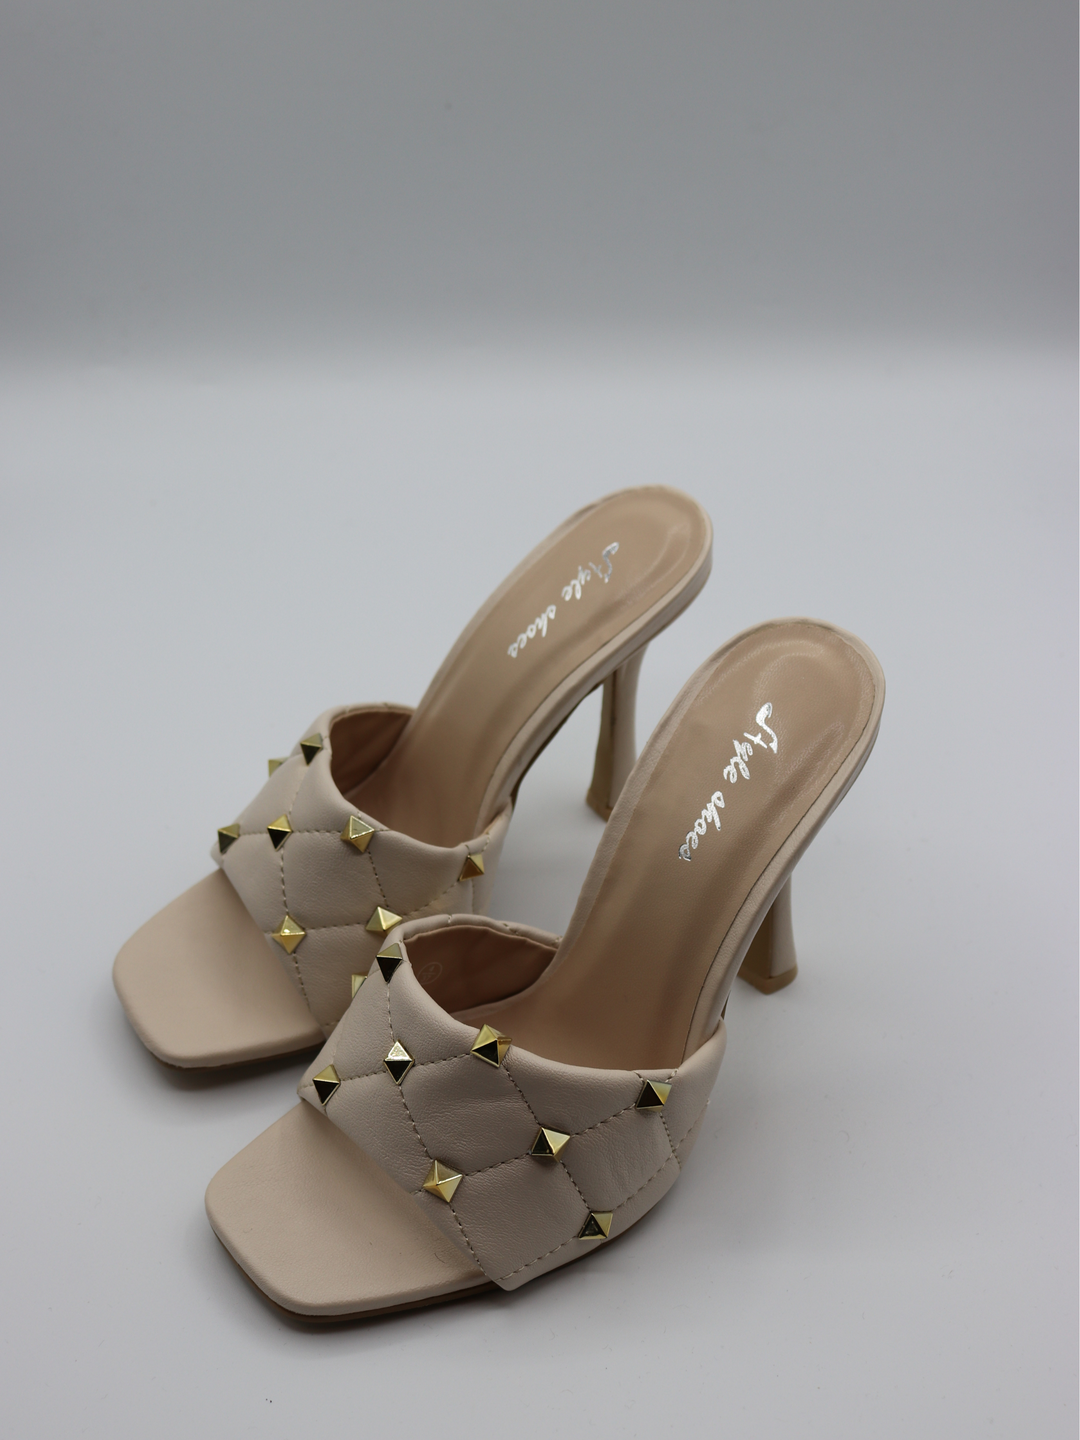 Cream quilted faux leather mule heels with gold studded heels. Photo shows the shoes from the side. The pair of shoes is visible. 